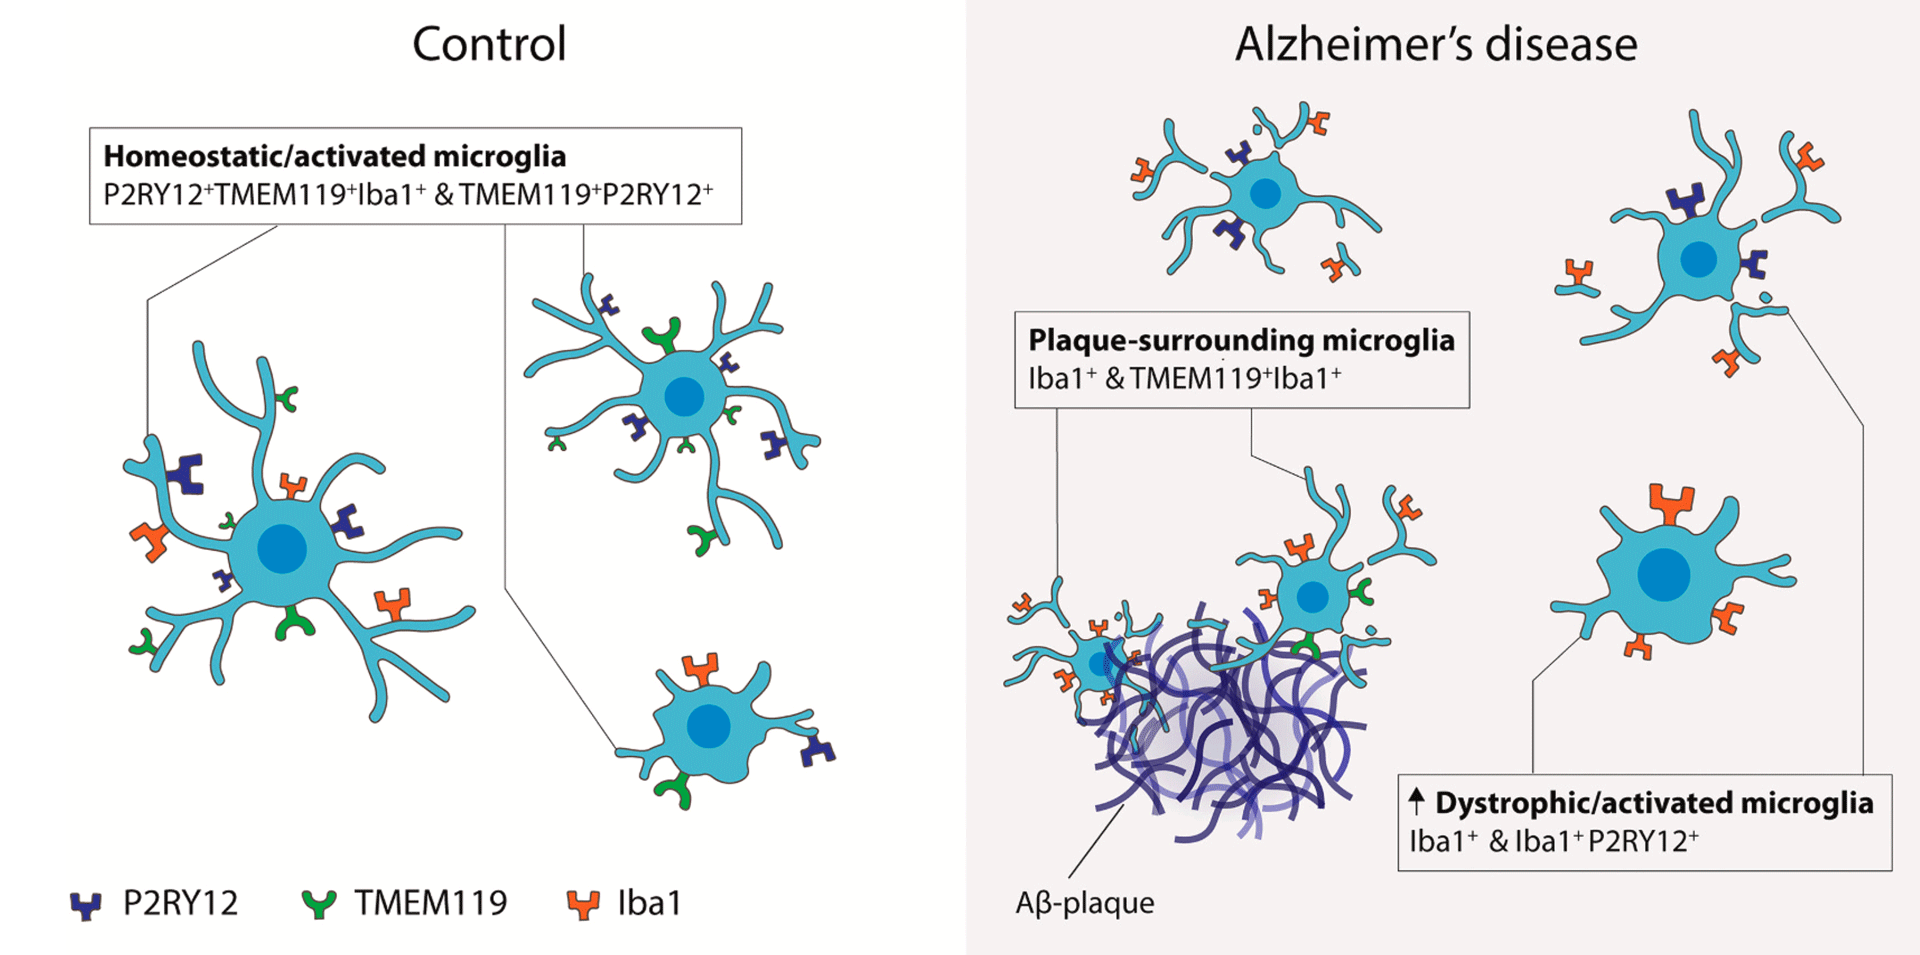 Co-expression patterns of microglia markers Iba1, TMEM119 and P2RY12 in Alzheimer's disease teaser image